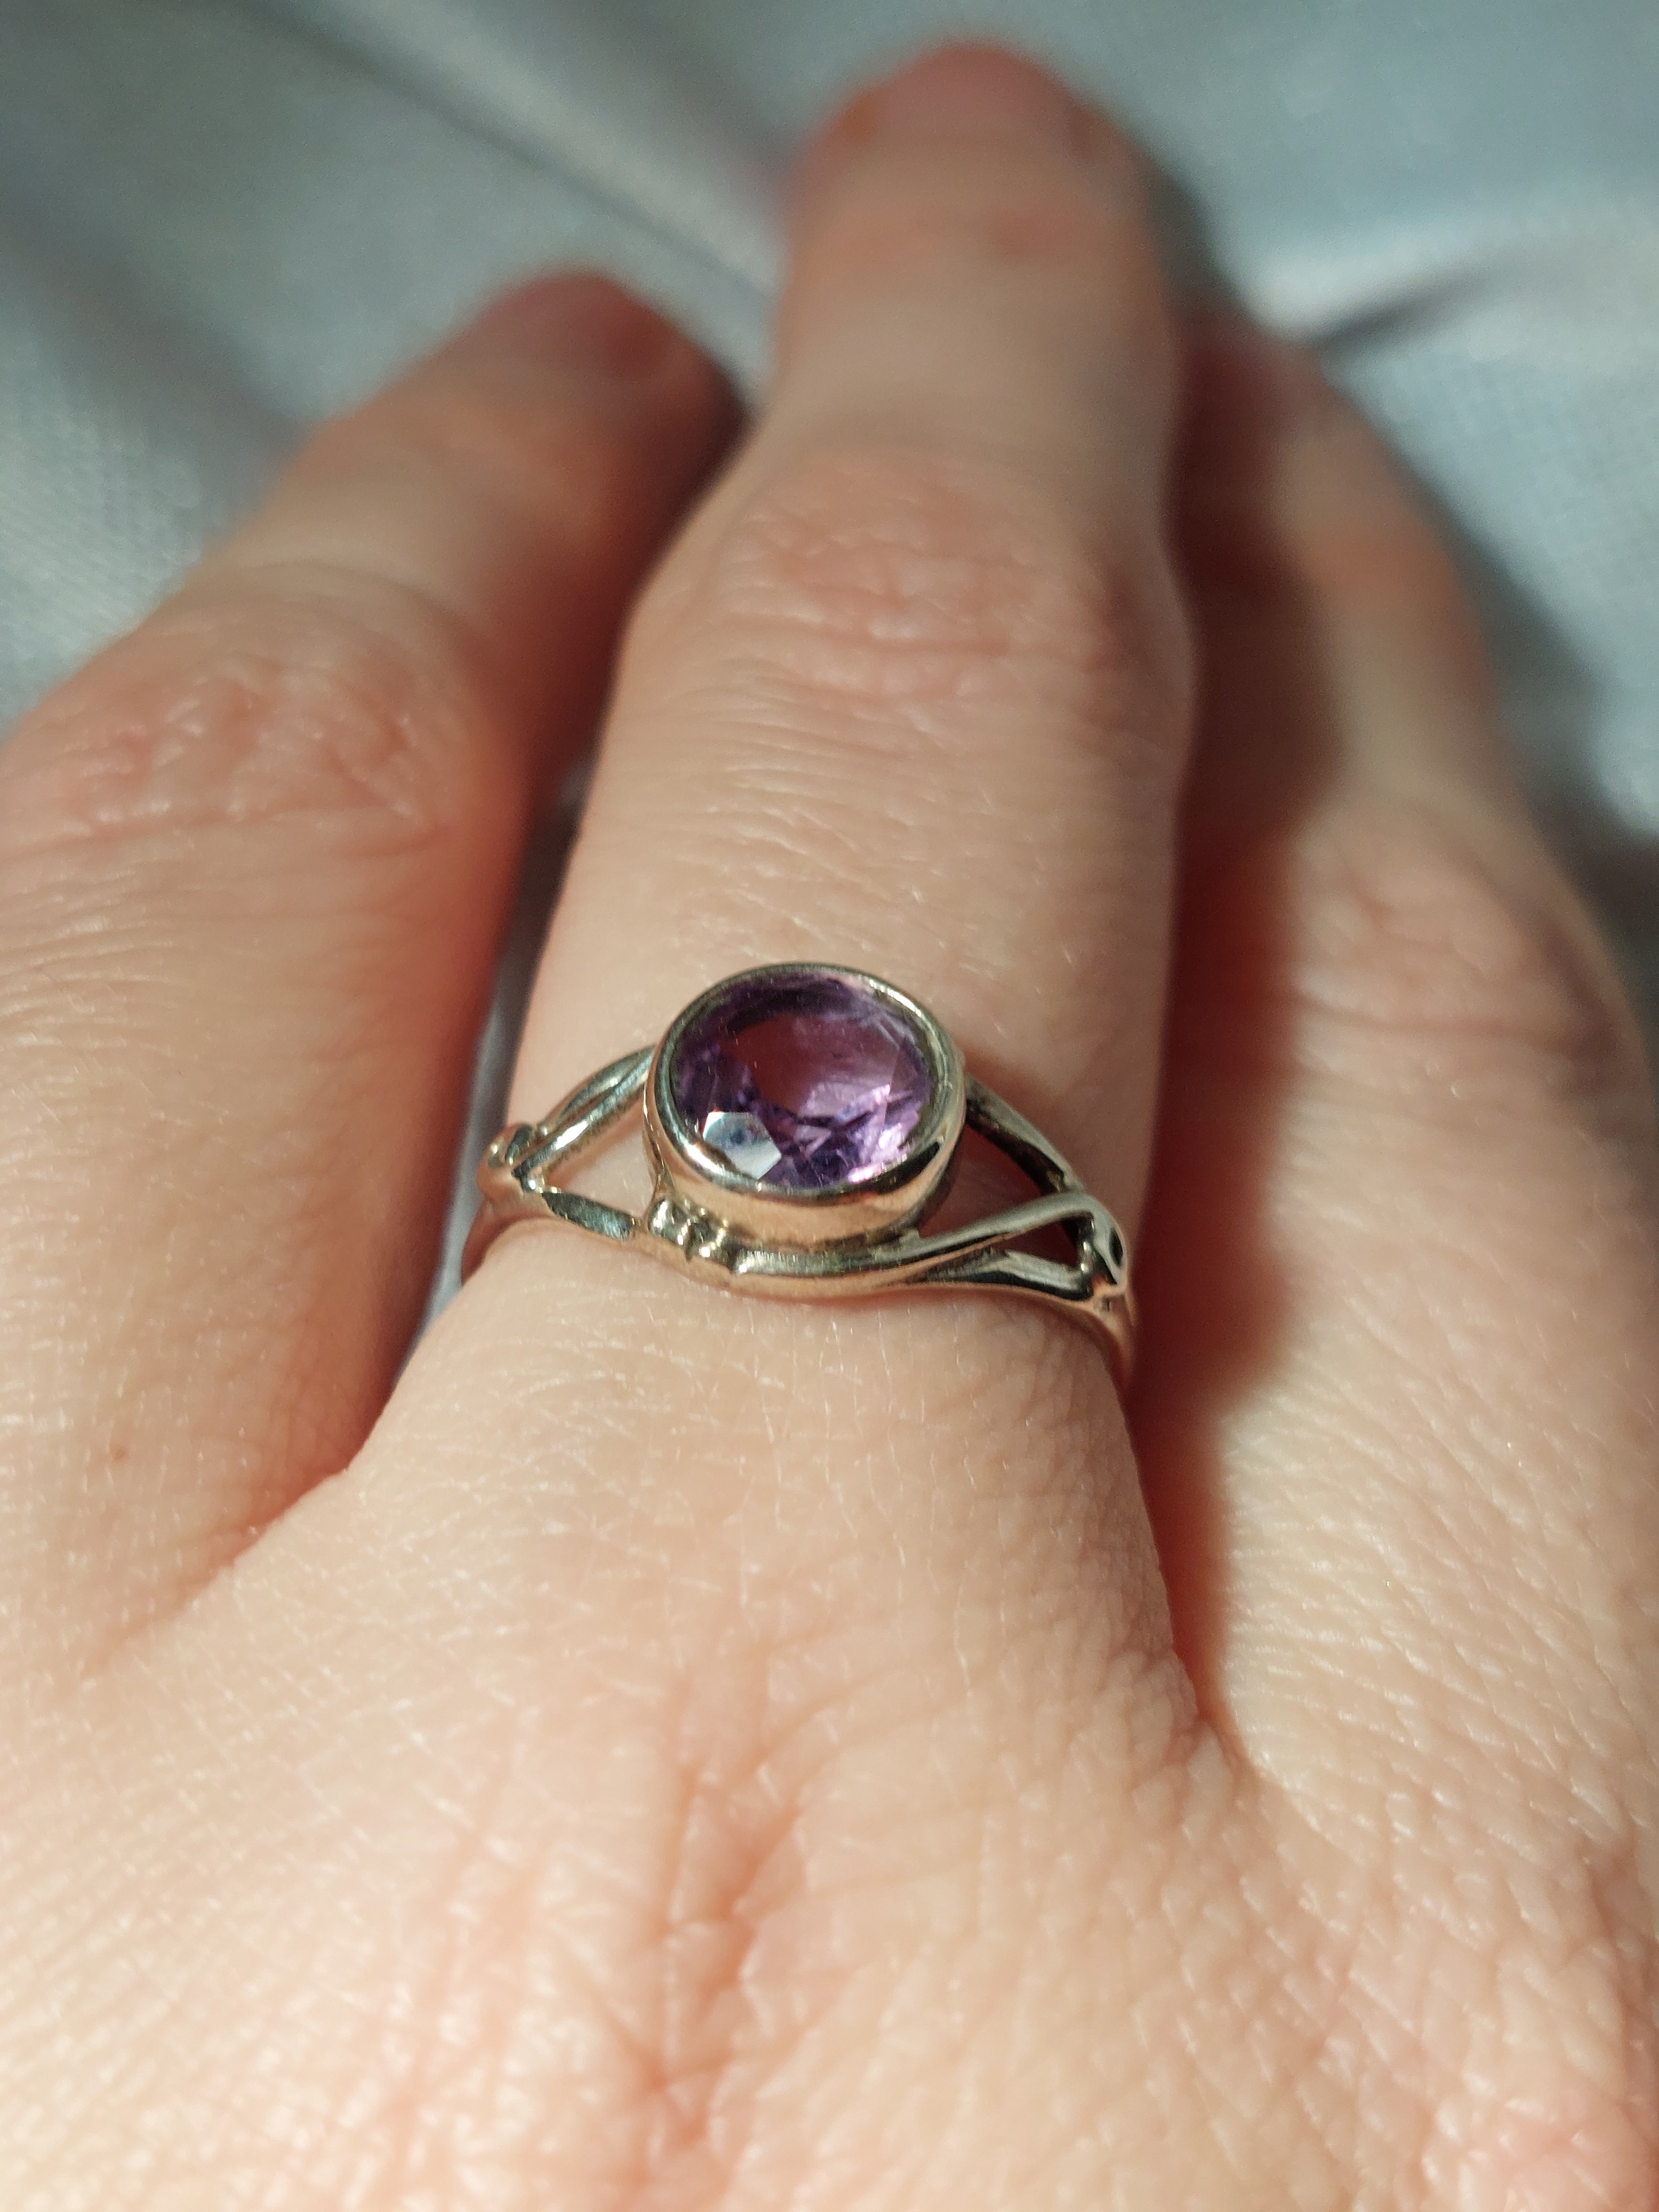 Circular Amethyst on Swirl Band Ring - Size 7 - 925 Sterling Silver